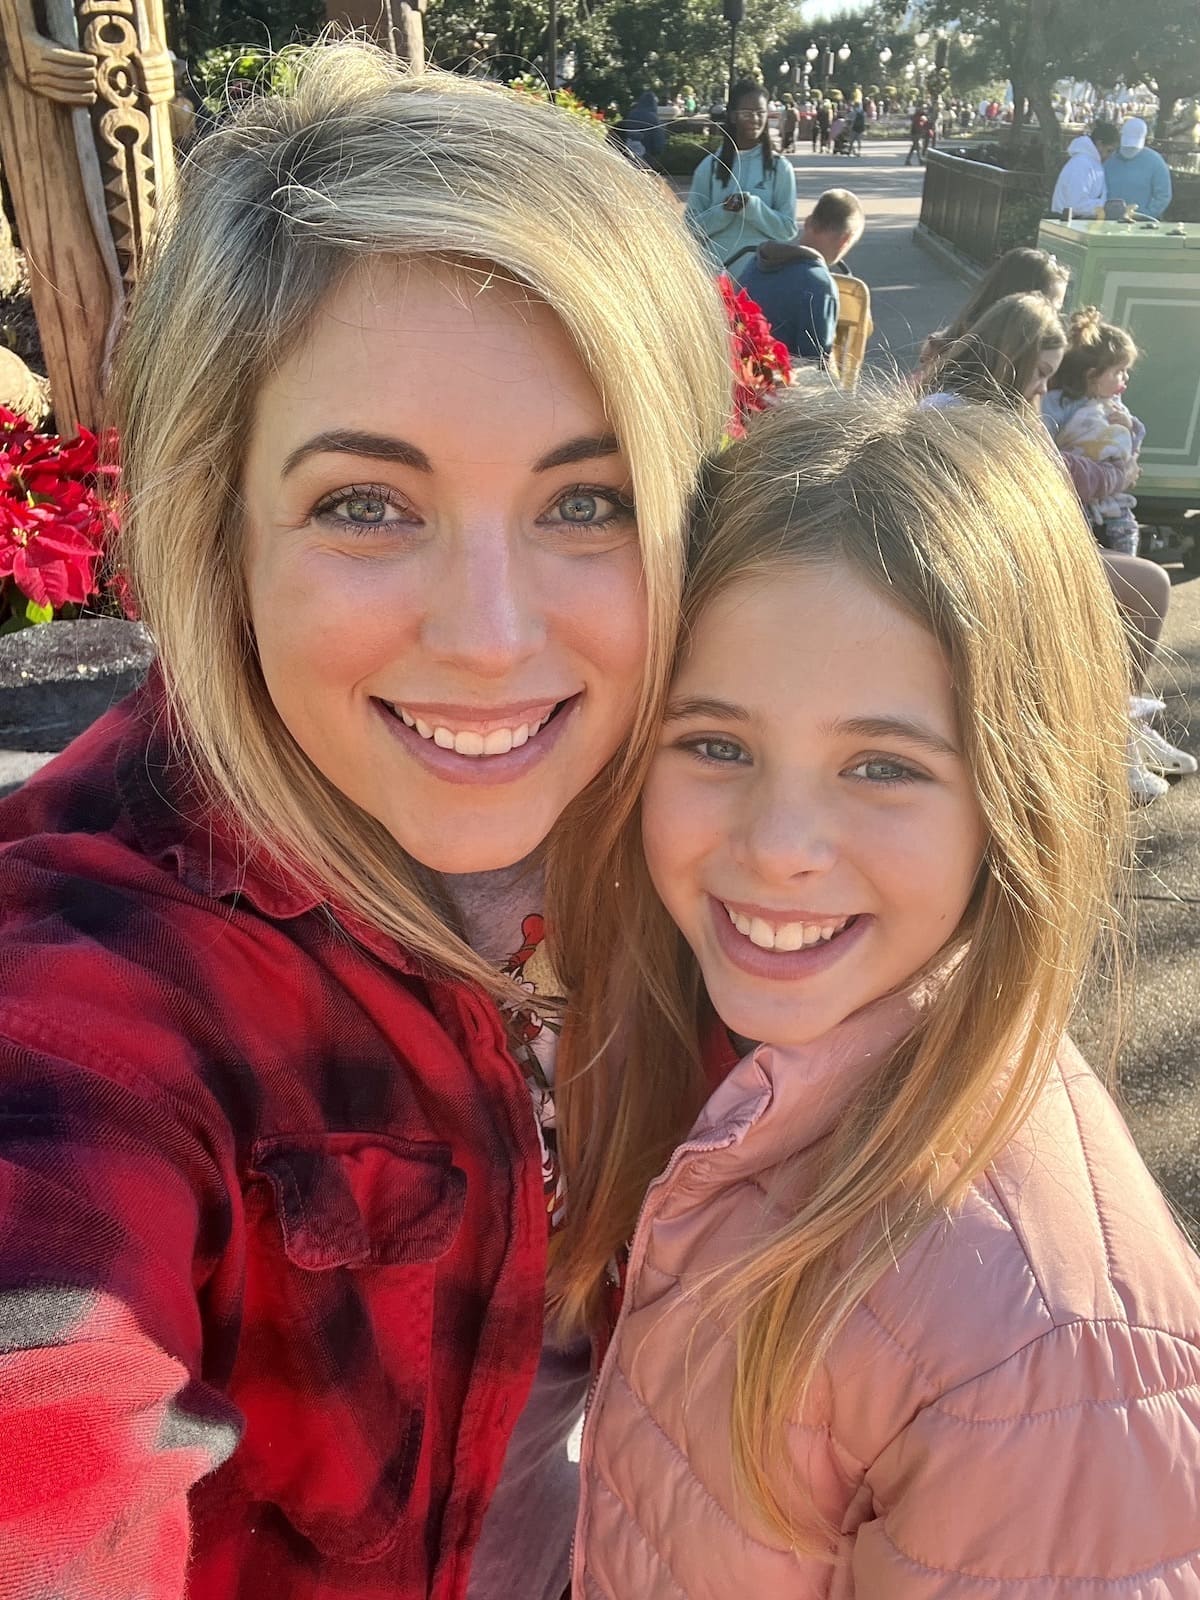 A letter to daughter on her 10th birthday from mom - an annual tradition! A simple, easy, special birthday tradition to write a letter to your child on each year of their lives. This letter is to a 10 year old daughter from mom on her tenth birthday 